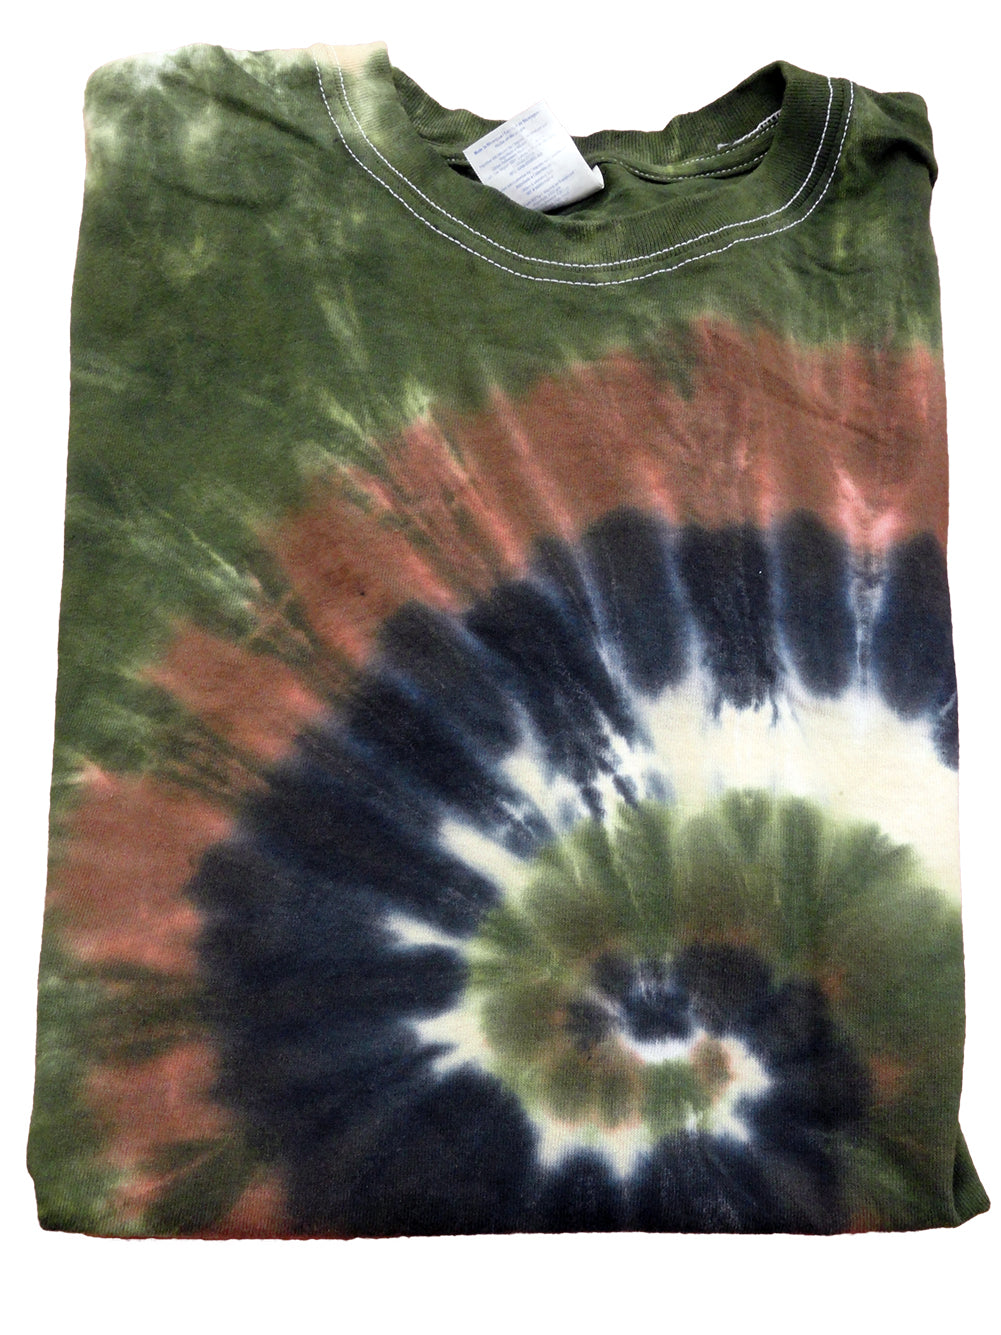 Green Camouflage Bandolier Tie Dye T-Shirt — Made By Hippies Tie Dyes